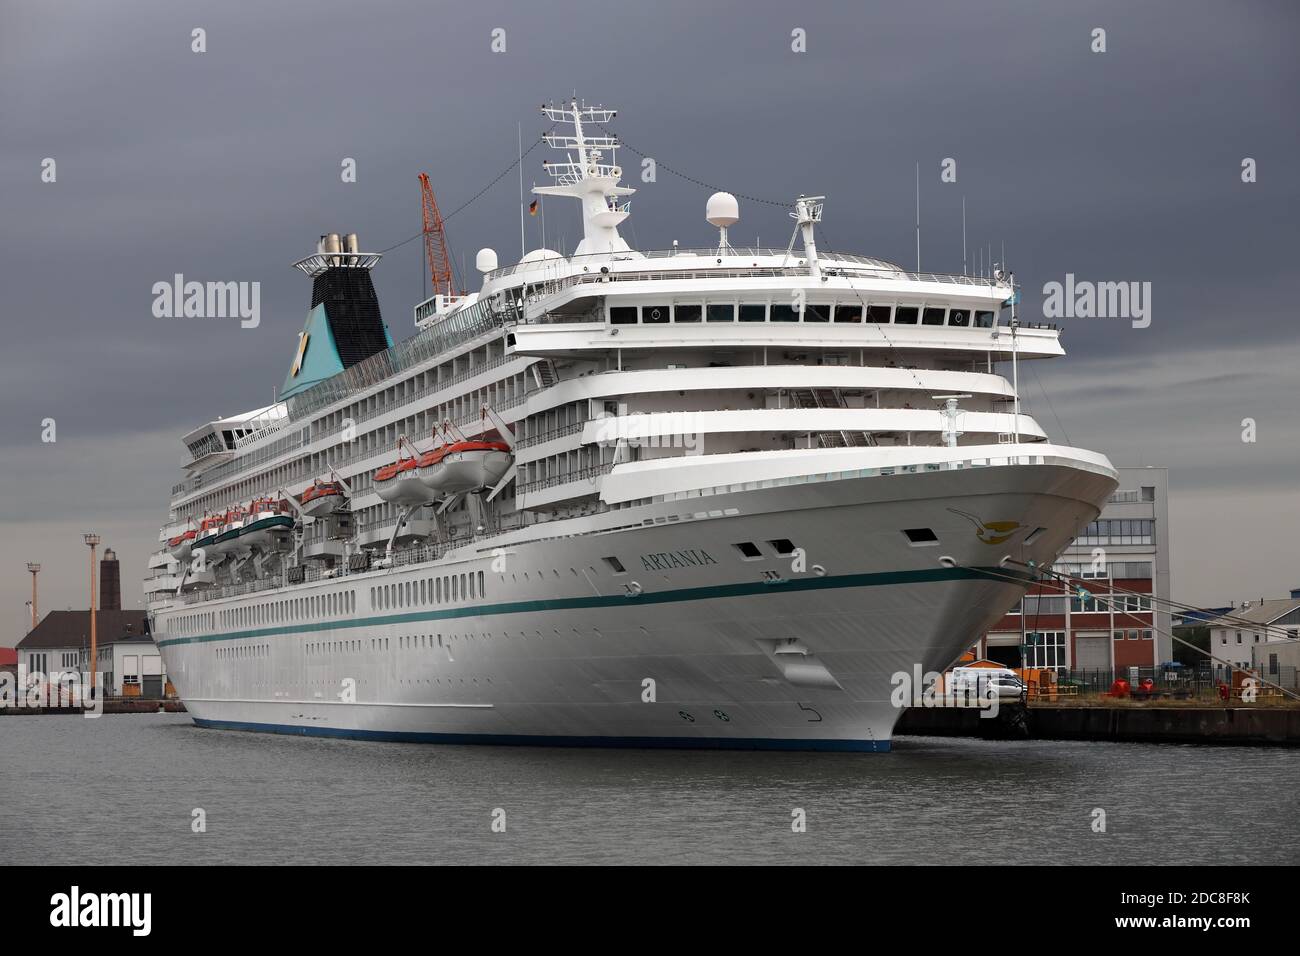 The cruise ship Artania will be moored in the port of Bremerhaven at the shipyard on August 20, 2020. Stock Photo